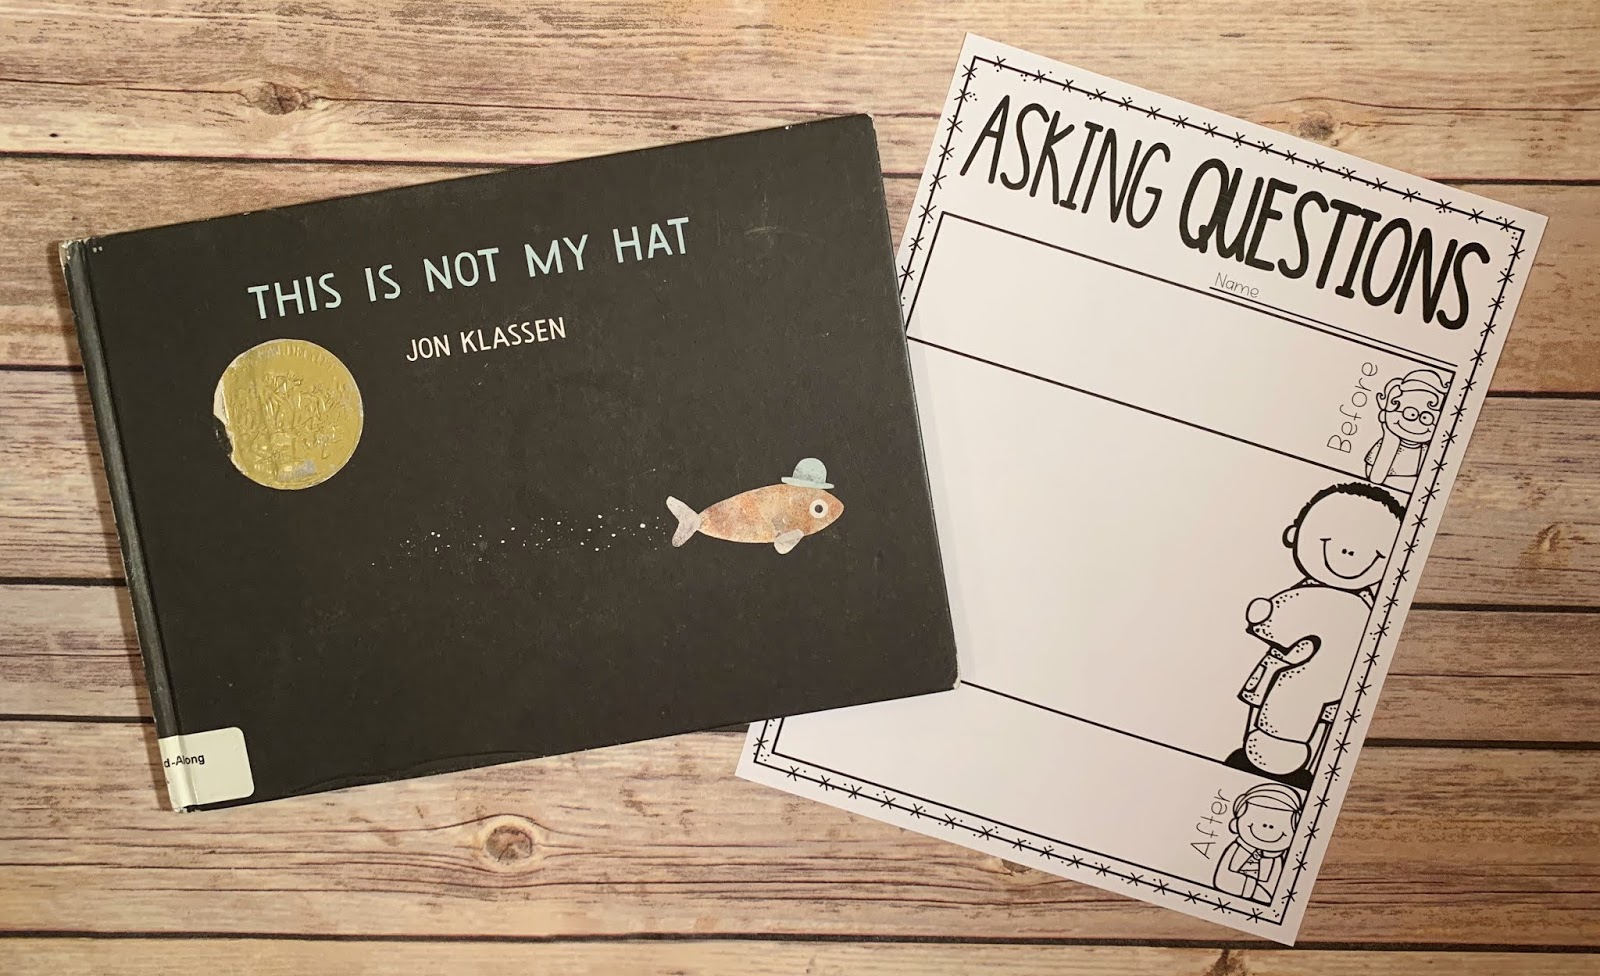 Mentor text with text "This is Not My Hat" and graphic organizer with text "Asking Questions" 